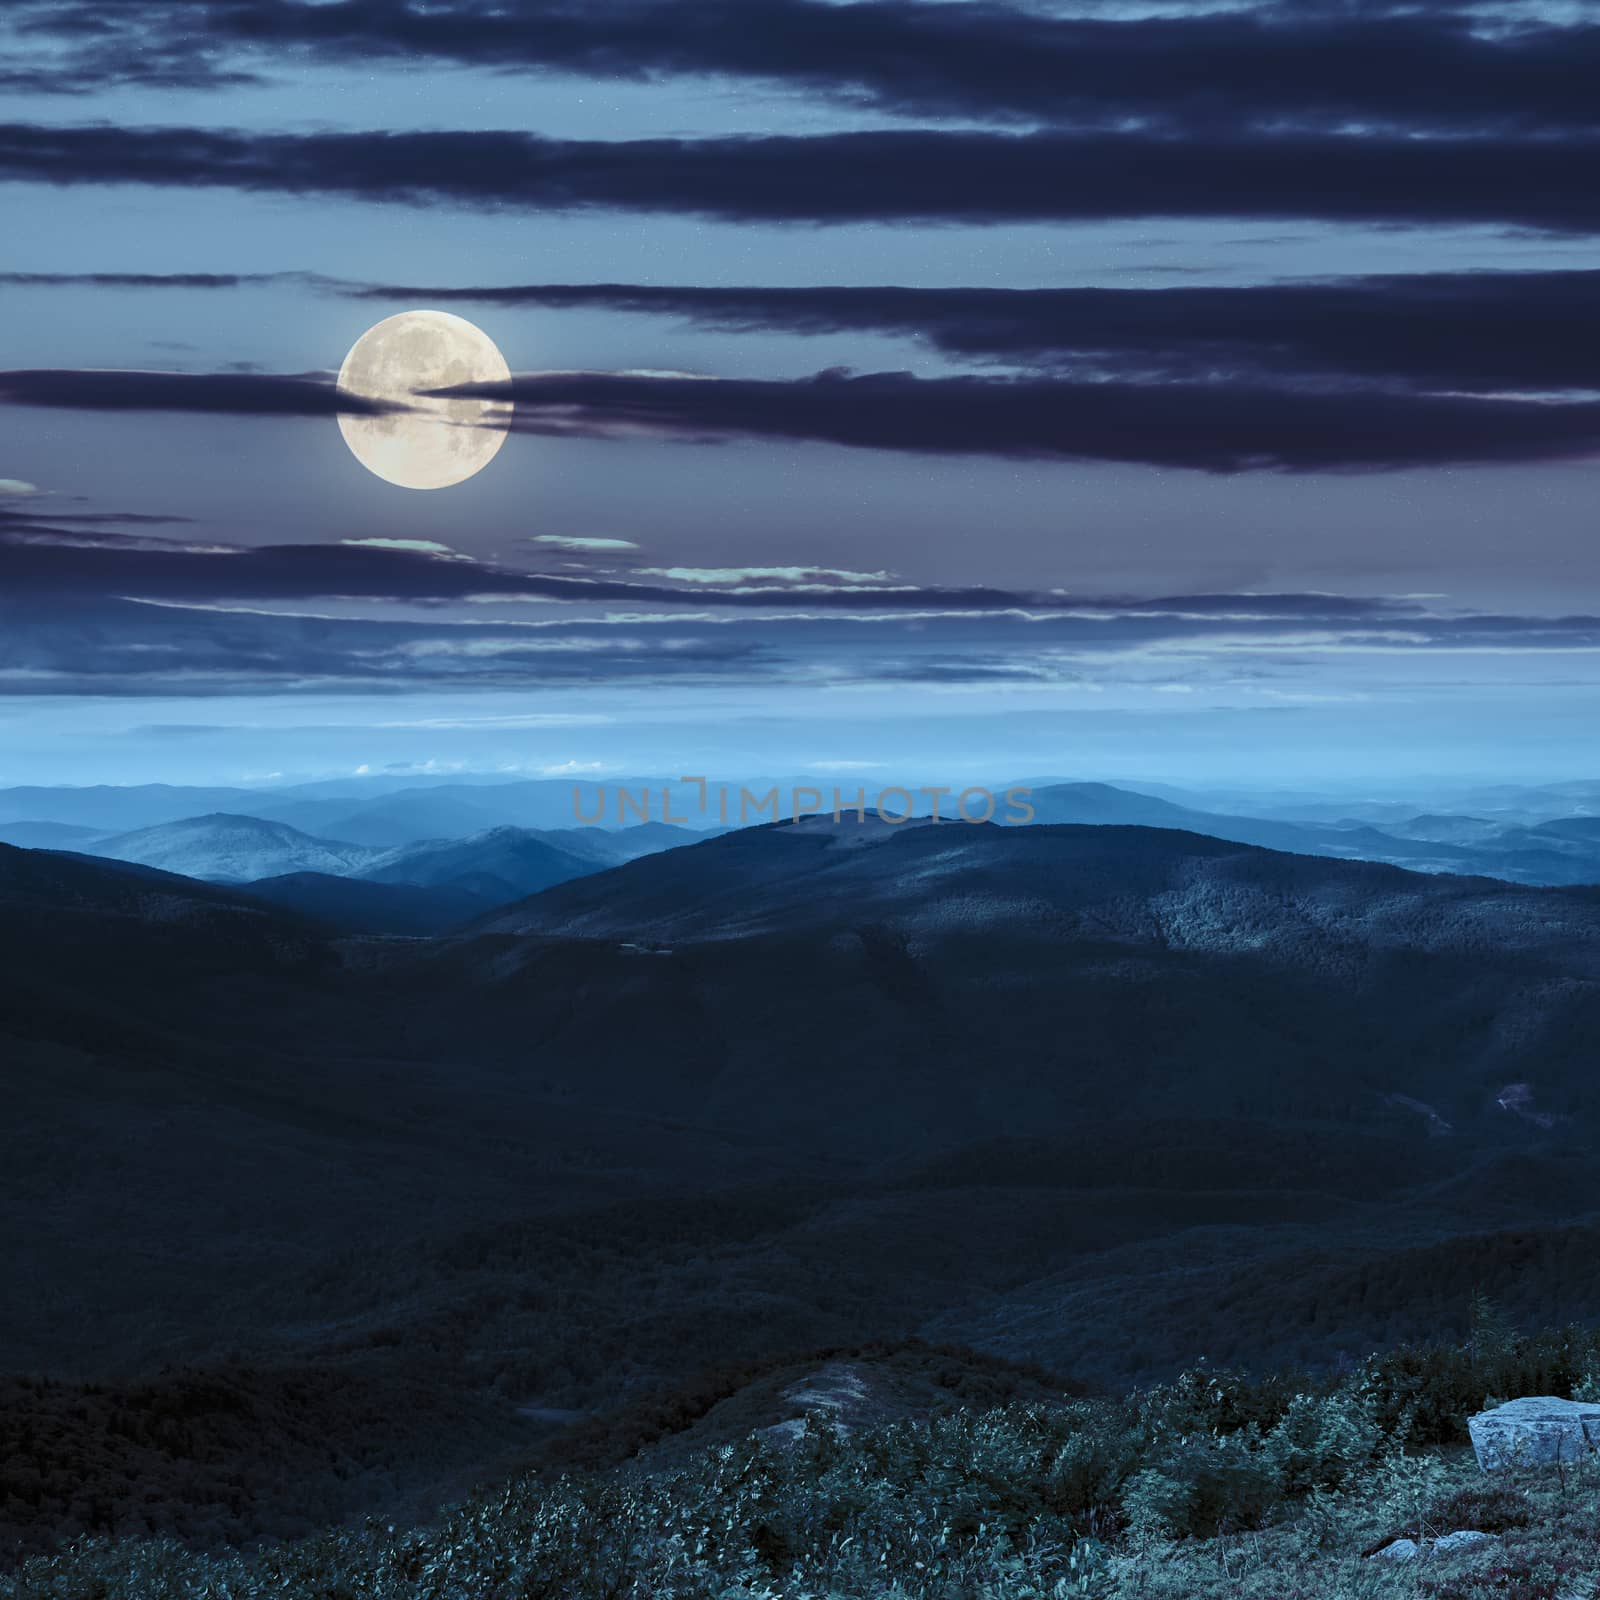 mountain landscape. valley with stones on the hillside. forest on the mountain under the beam of light falls on a clearing at the top of the hill at night in full moon light